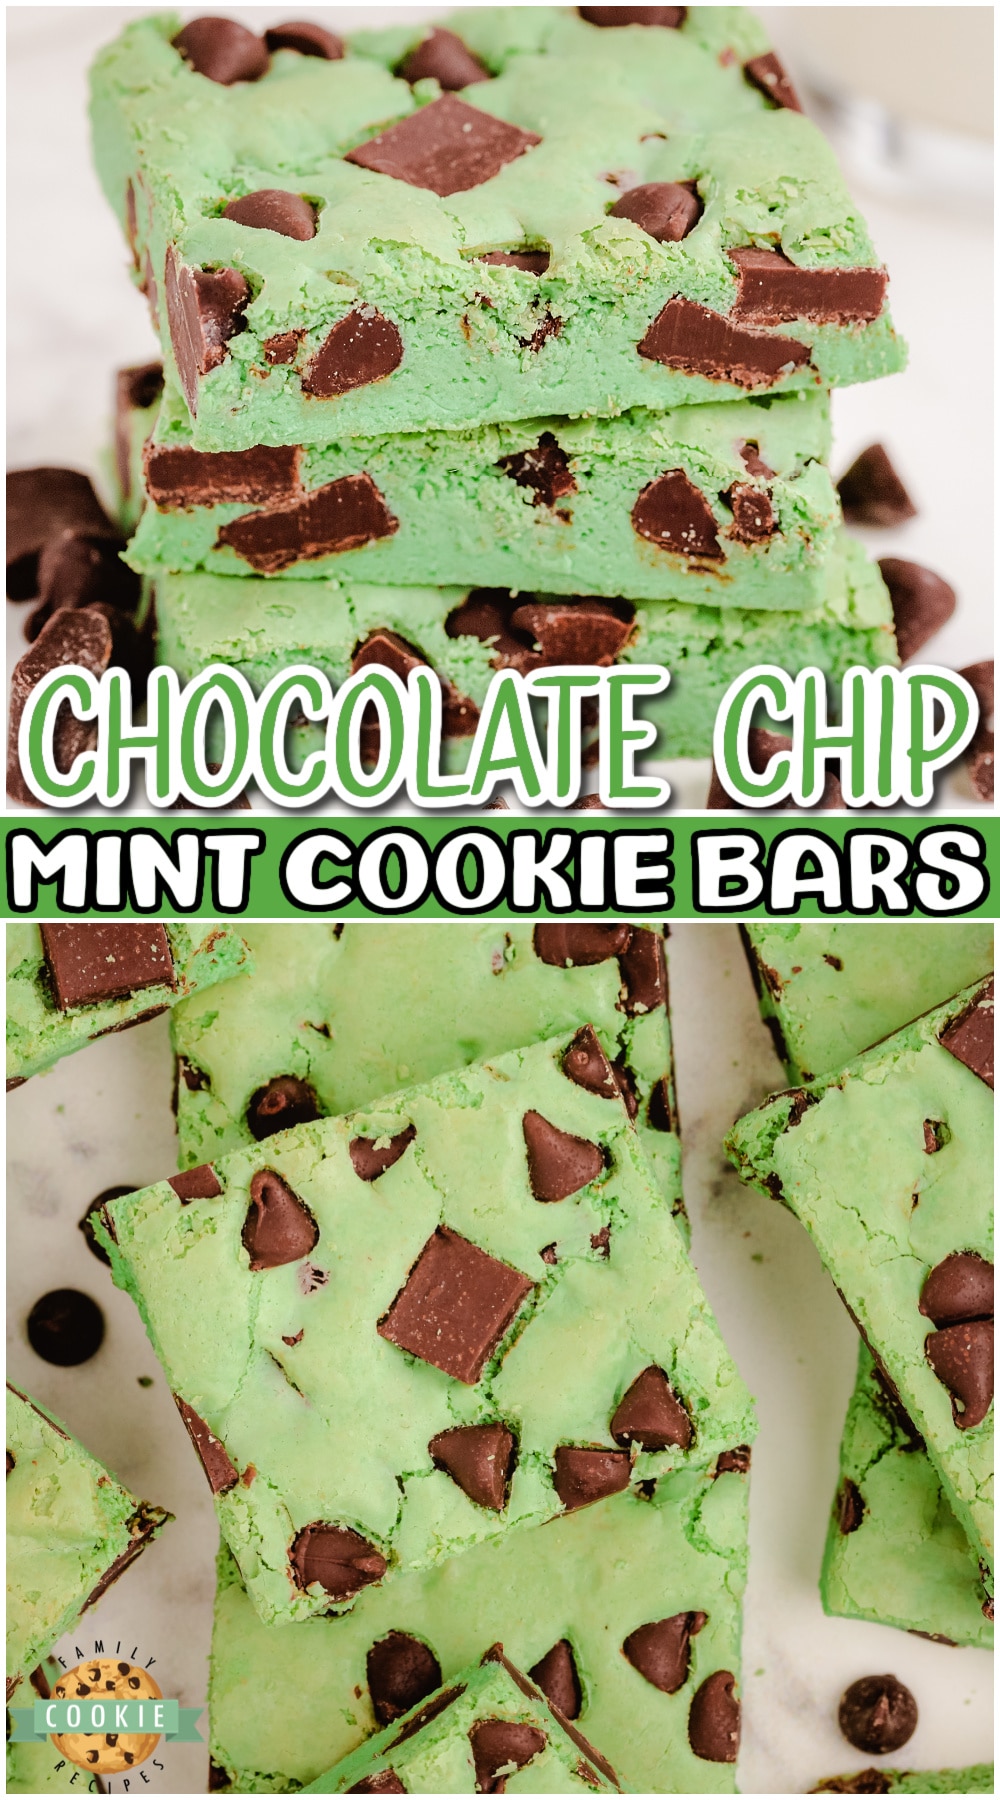 Mint chocolate chip cookie bars are the perfect mint green St. Patrick's Day dessert! Made from scratch with simple ingredients and steps these chewy cookie bars are always a fun treat.